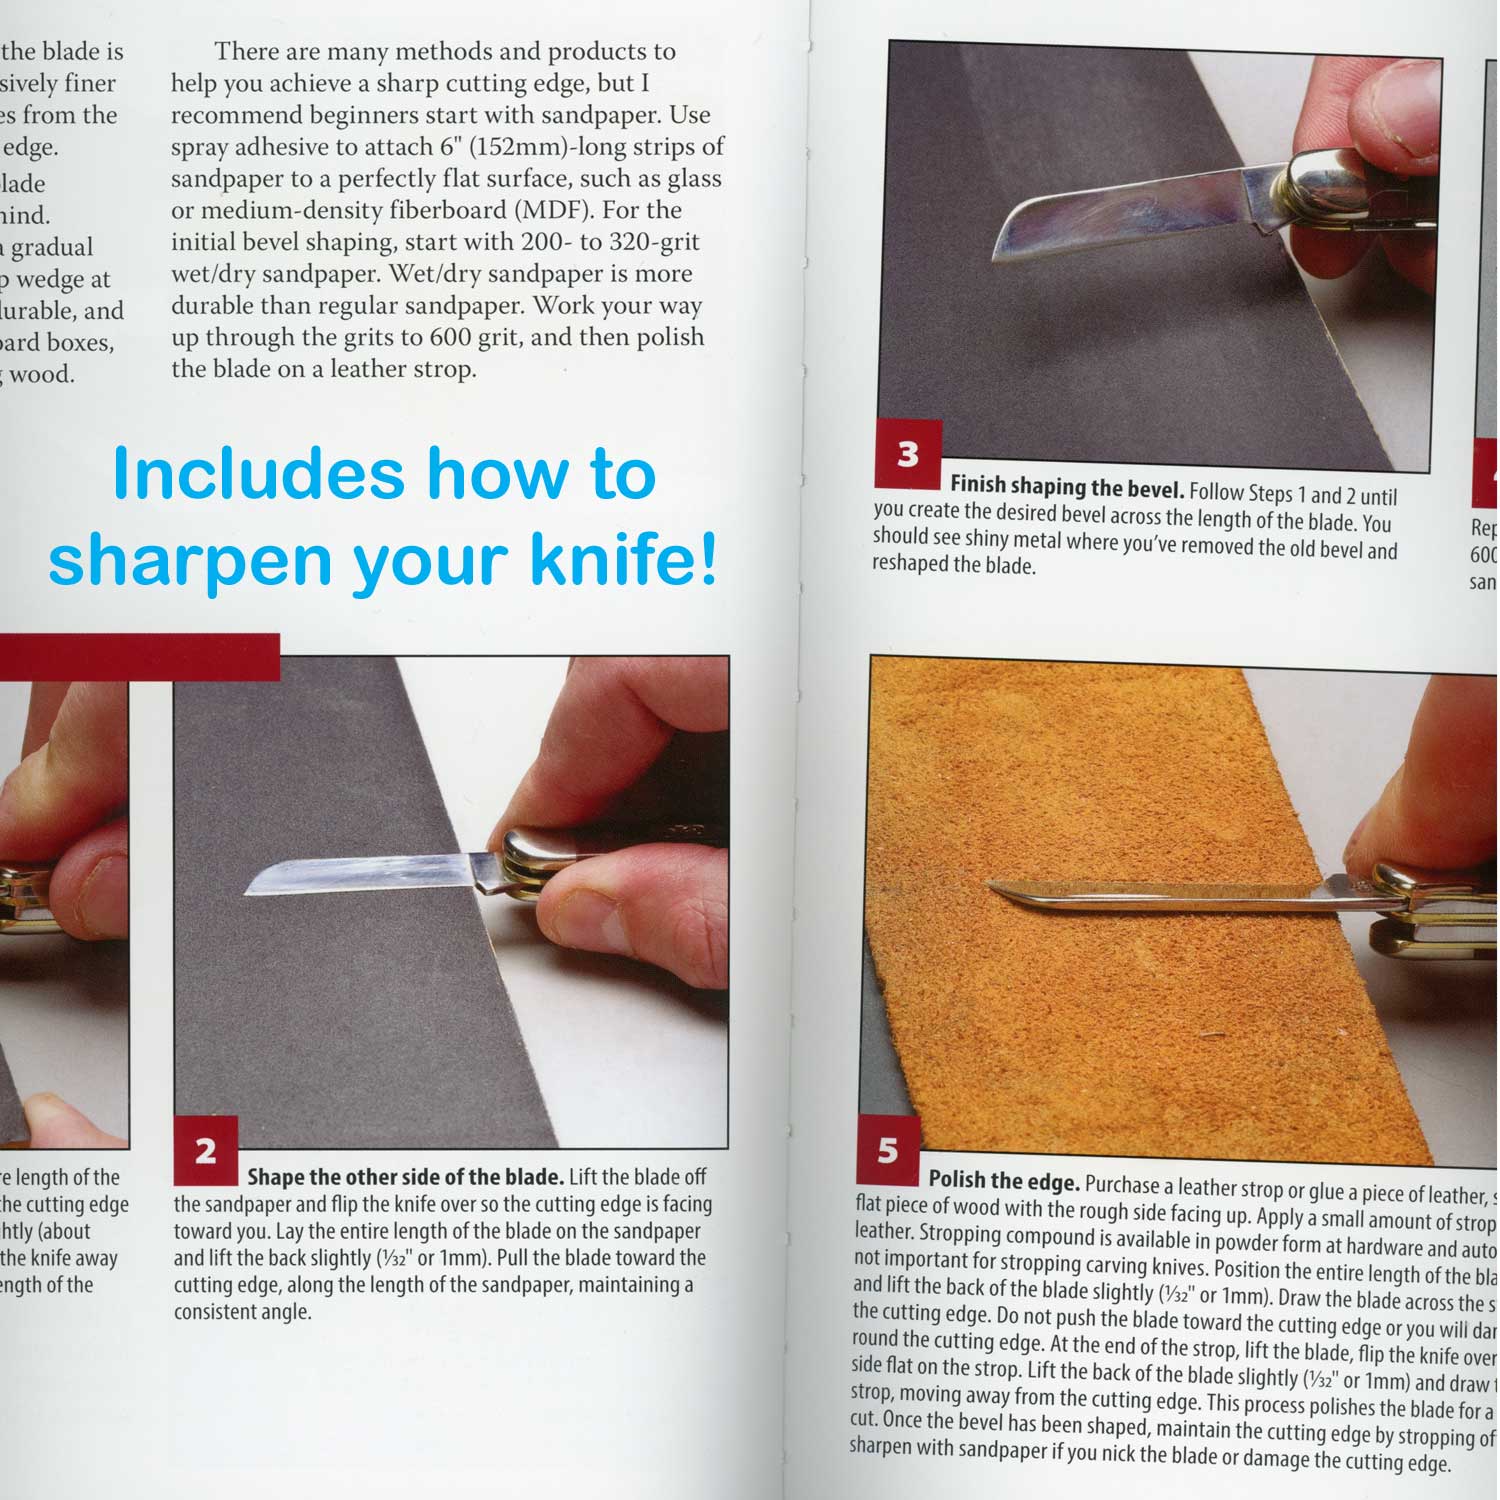 How to Start Whittling - Complete Beginners Guide to Whittling 